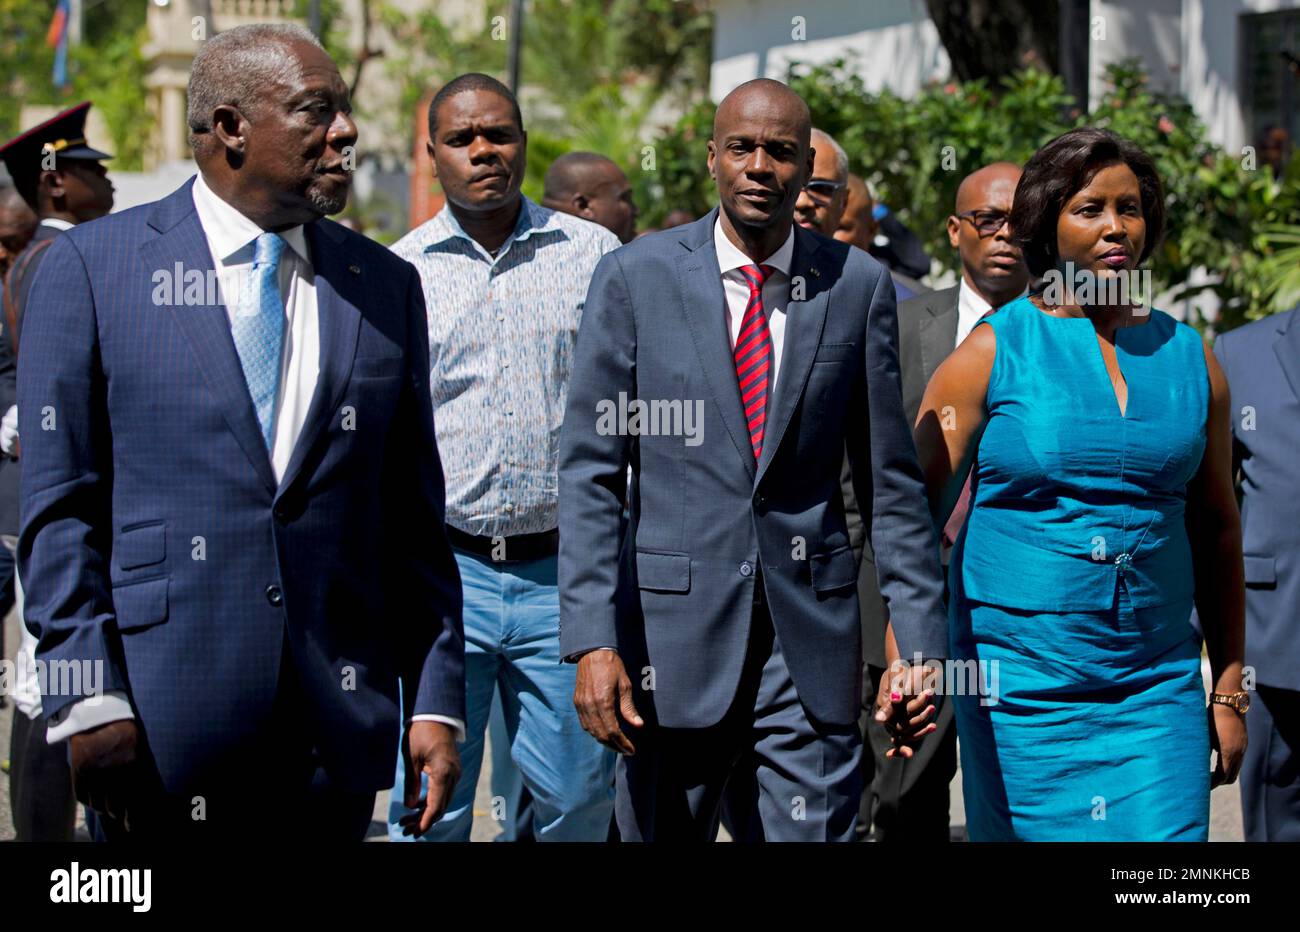 Haiti's President Jovenel Moise, center, walks with first lady Martine Moise and his Defense Minister Herve Denis, left, during a ceremony presenting the leadership of the newly reinstated Haitian Armed Forces (FAd'h) in Port-au-Prince, Haiti, Tuesday, March 27, 2018. Haiti has revived its military force decades after a national army was disbanded, and after U.N. military peacekeepers exited this Caribbean nation in 2017. (AP Photo/Dieu Nalio Chery) Stock Photo